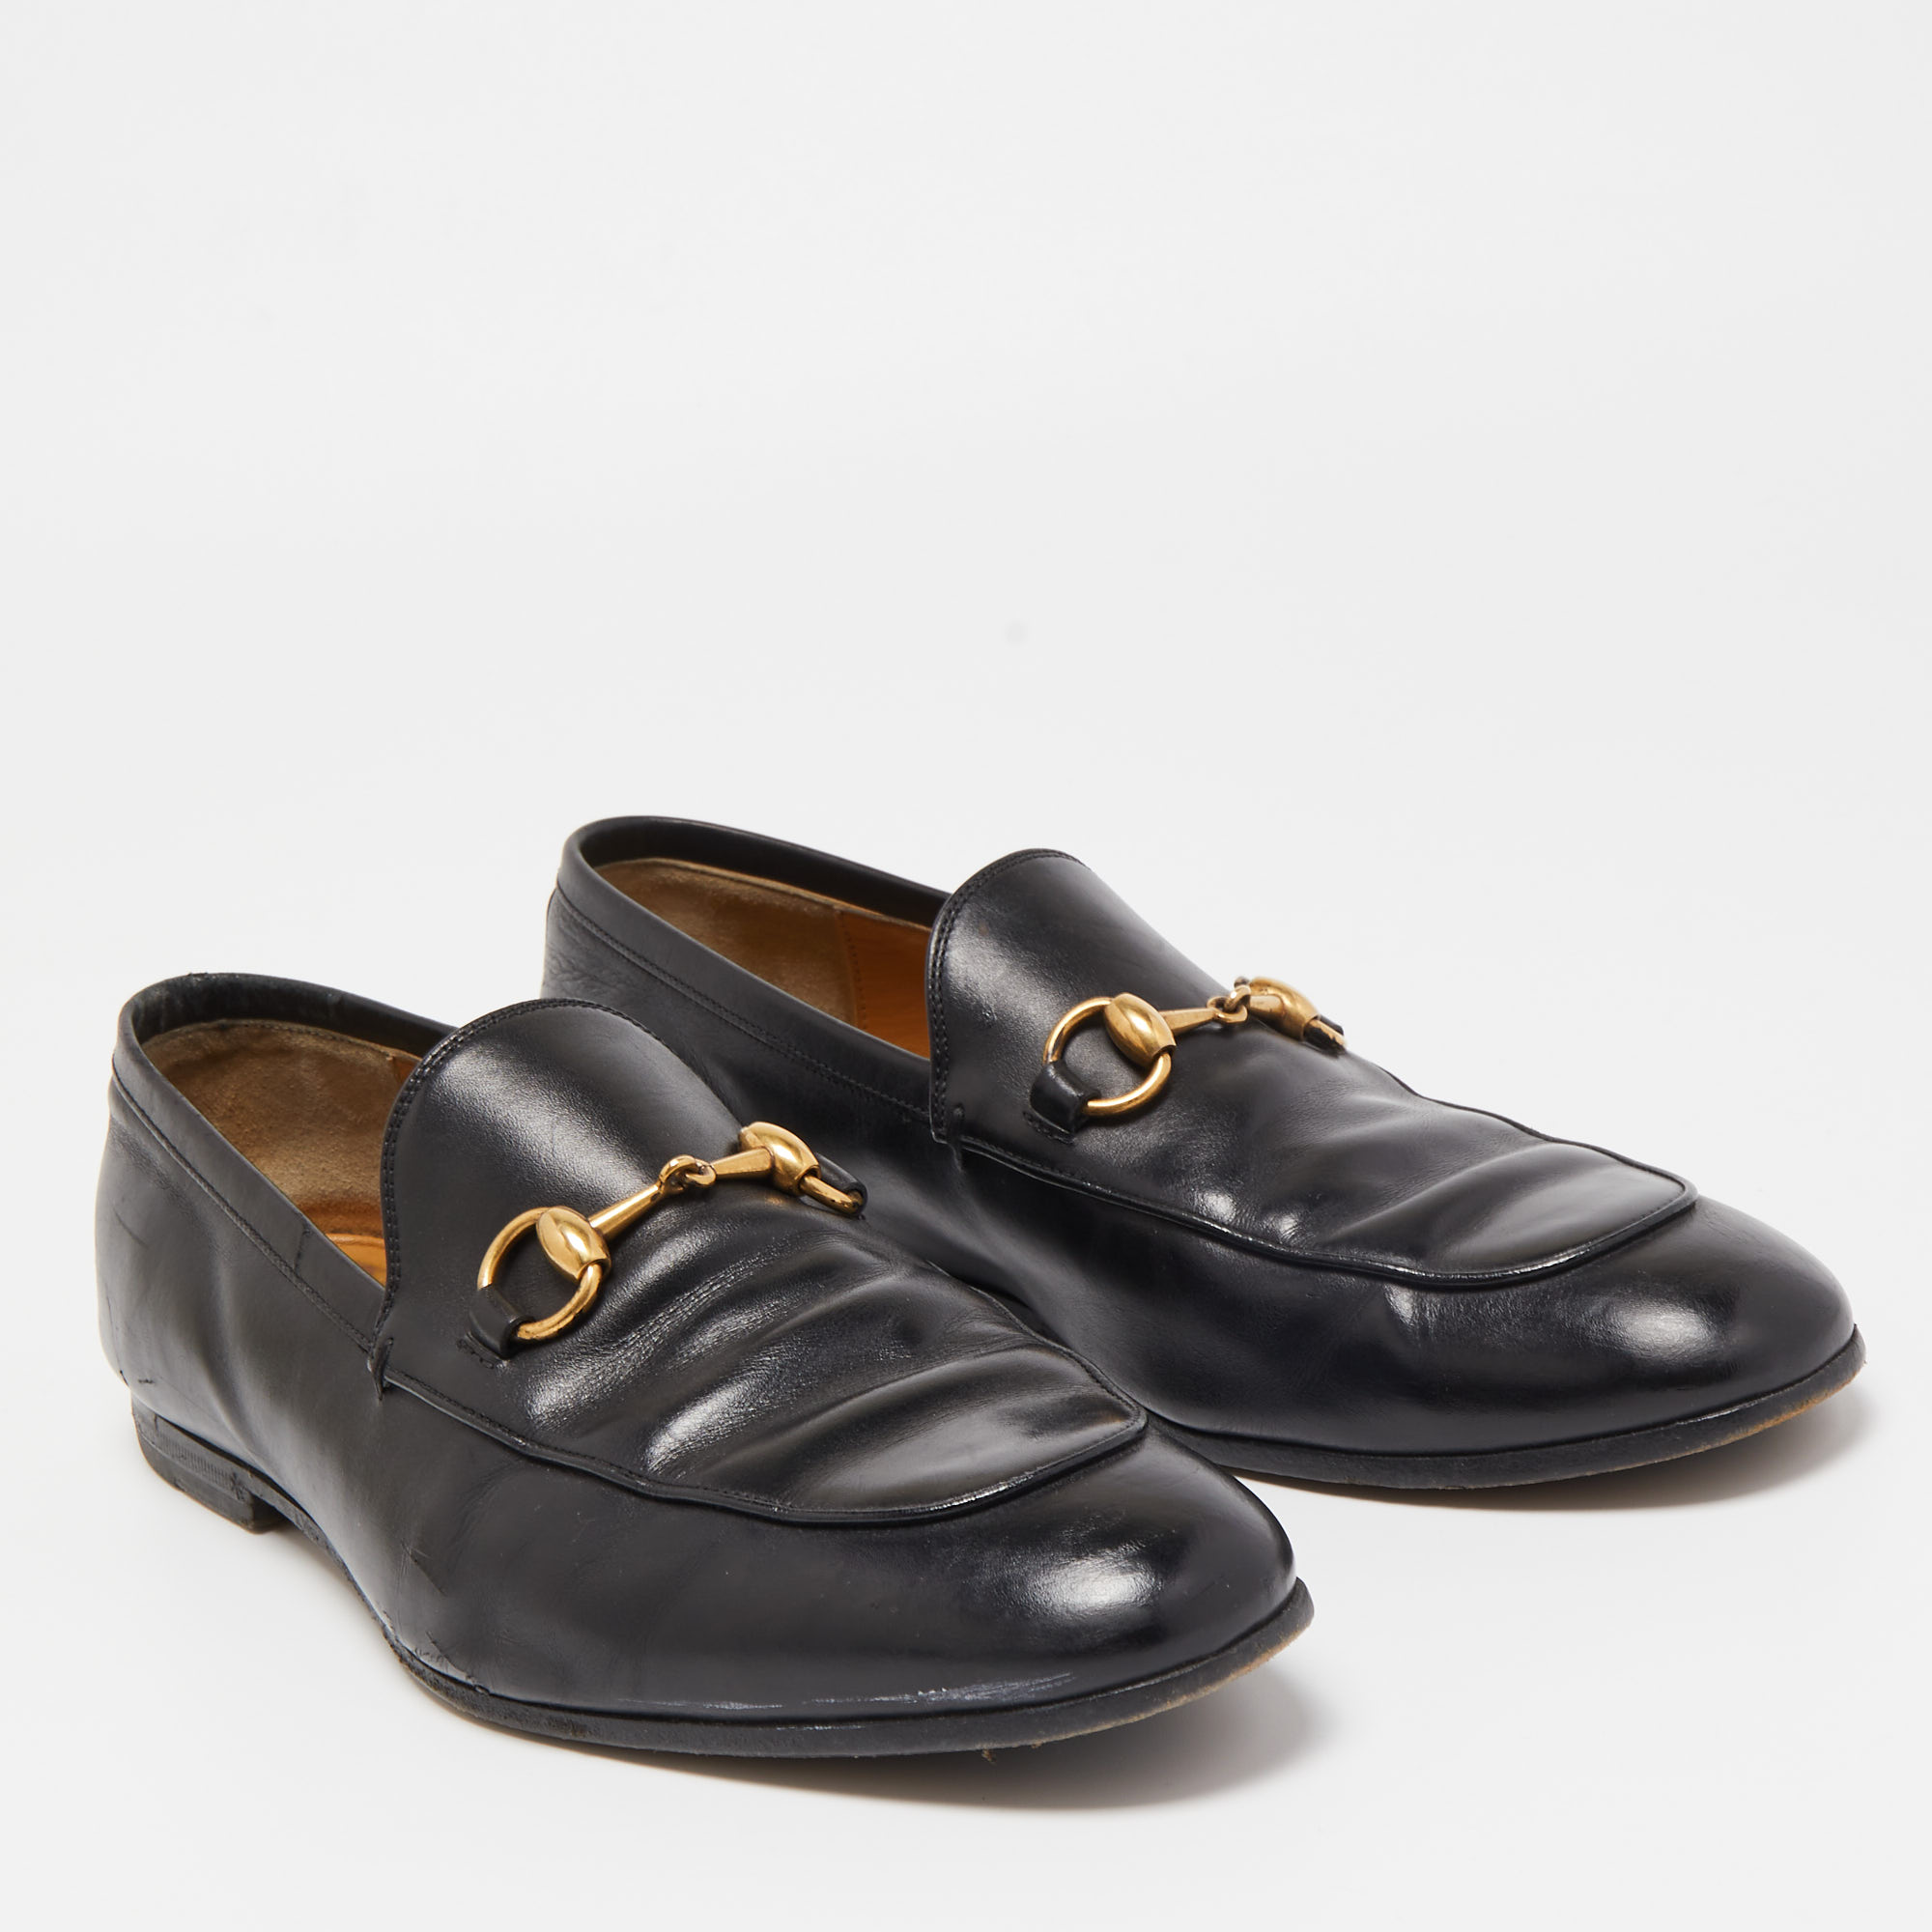 Gucci Black Leather Jordaan Loafers Size 41